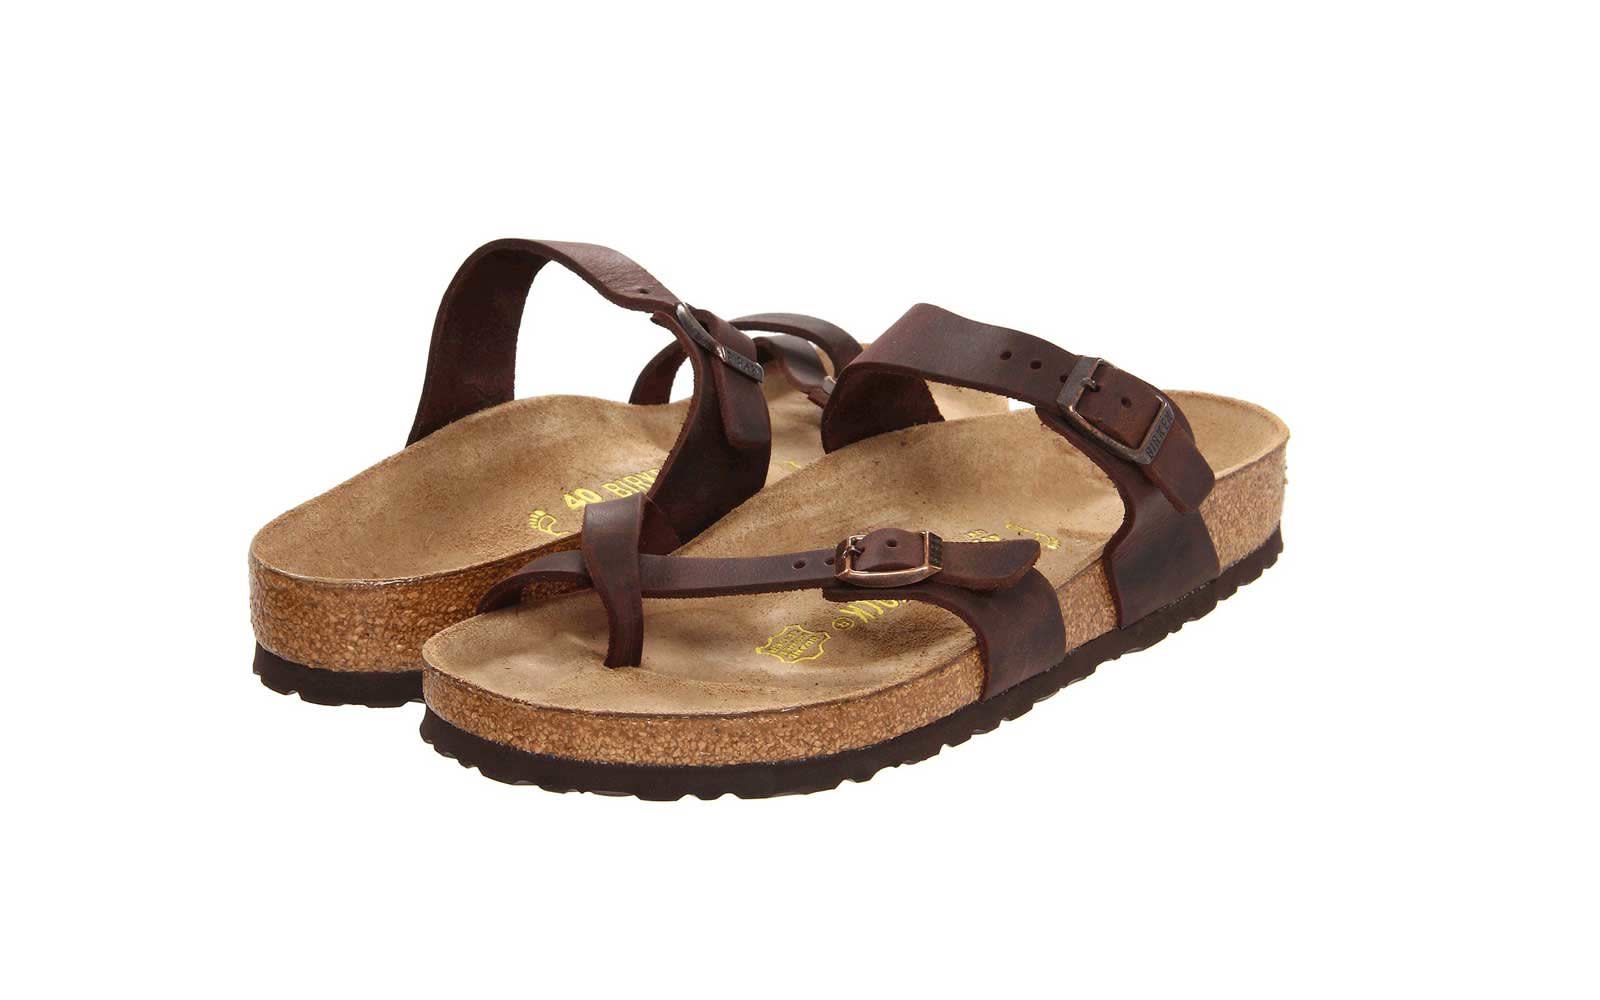 most supportive sandals for walking